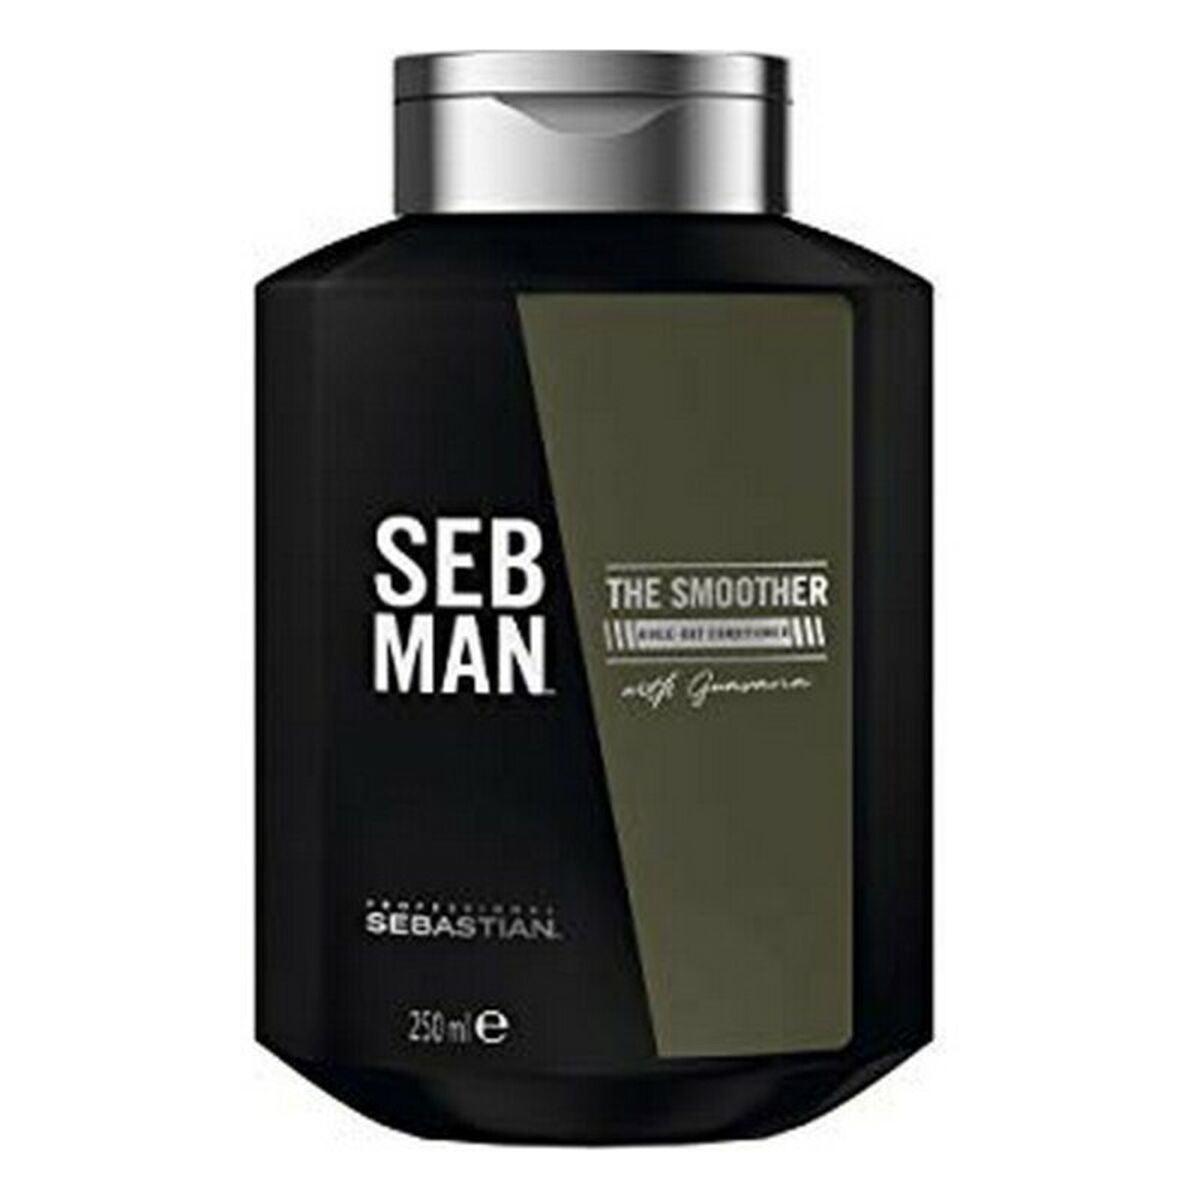 Conditioner Seb Man The Smoother (250 ml) - VirtuousWares:Global